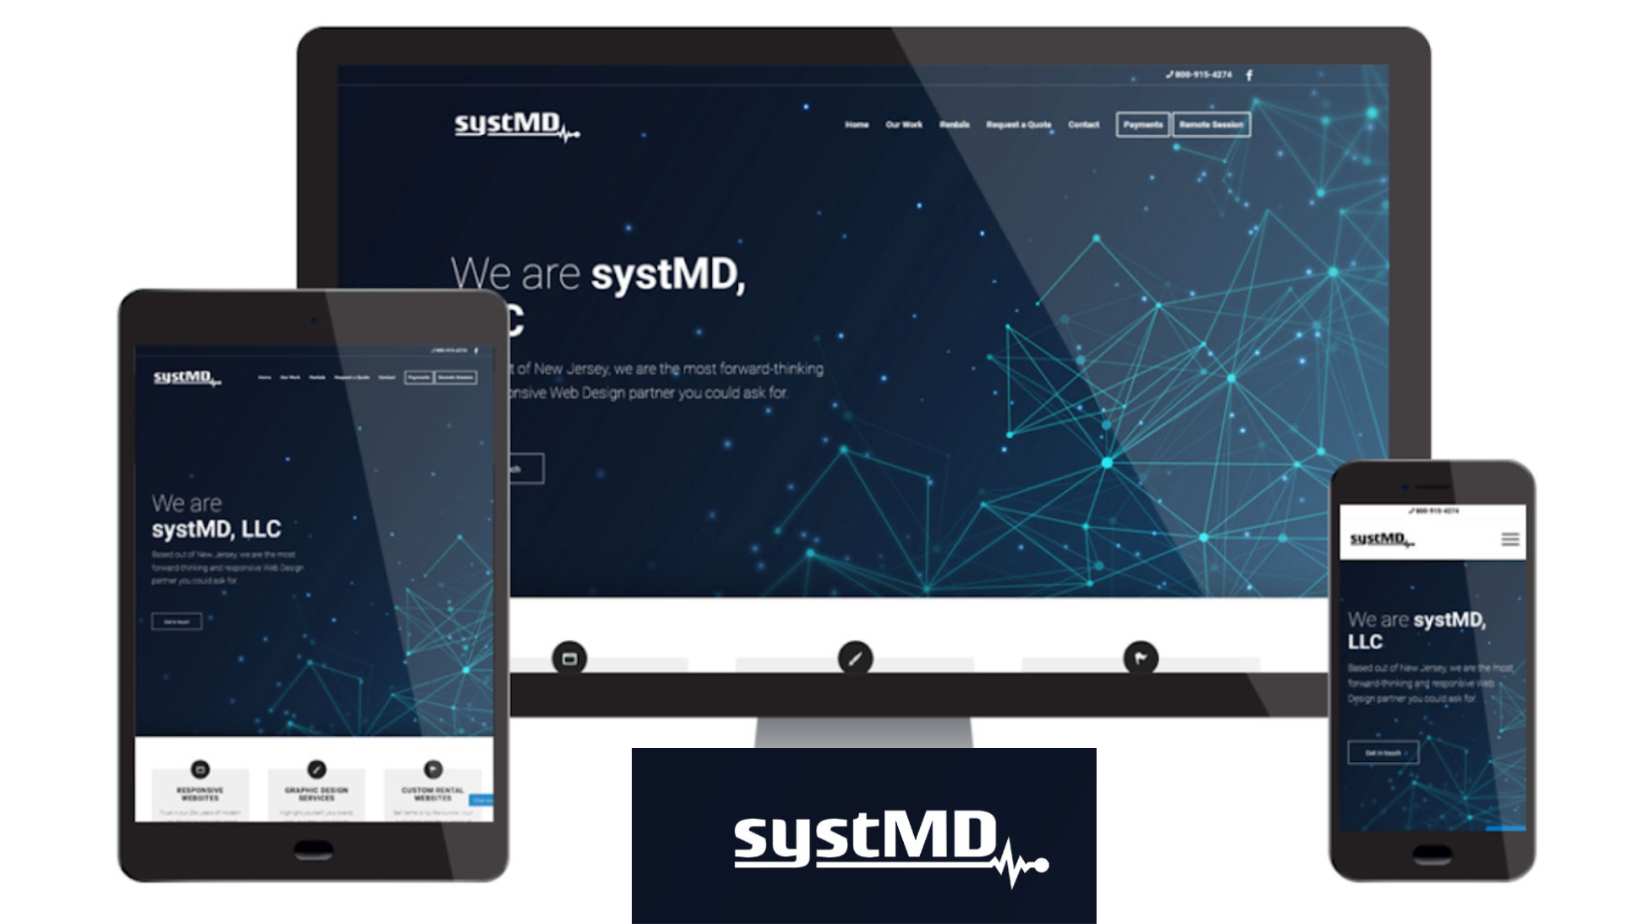 SystMD Celebrates 5 Years of Innovation in Web Design